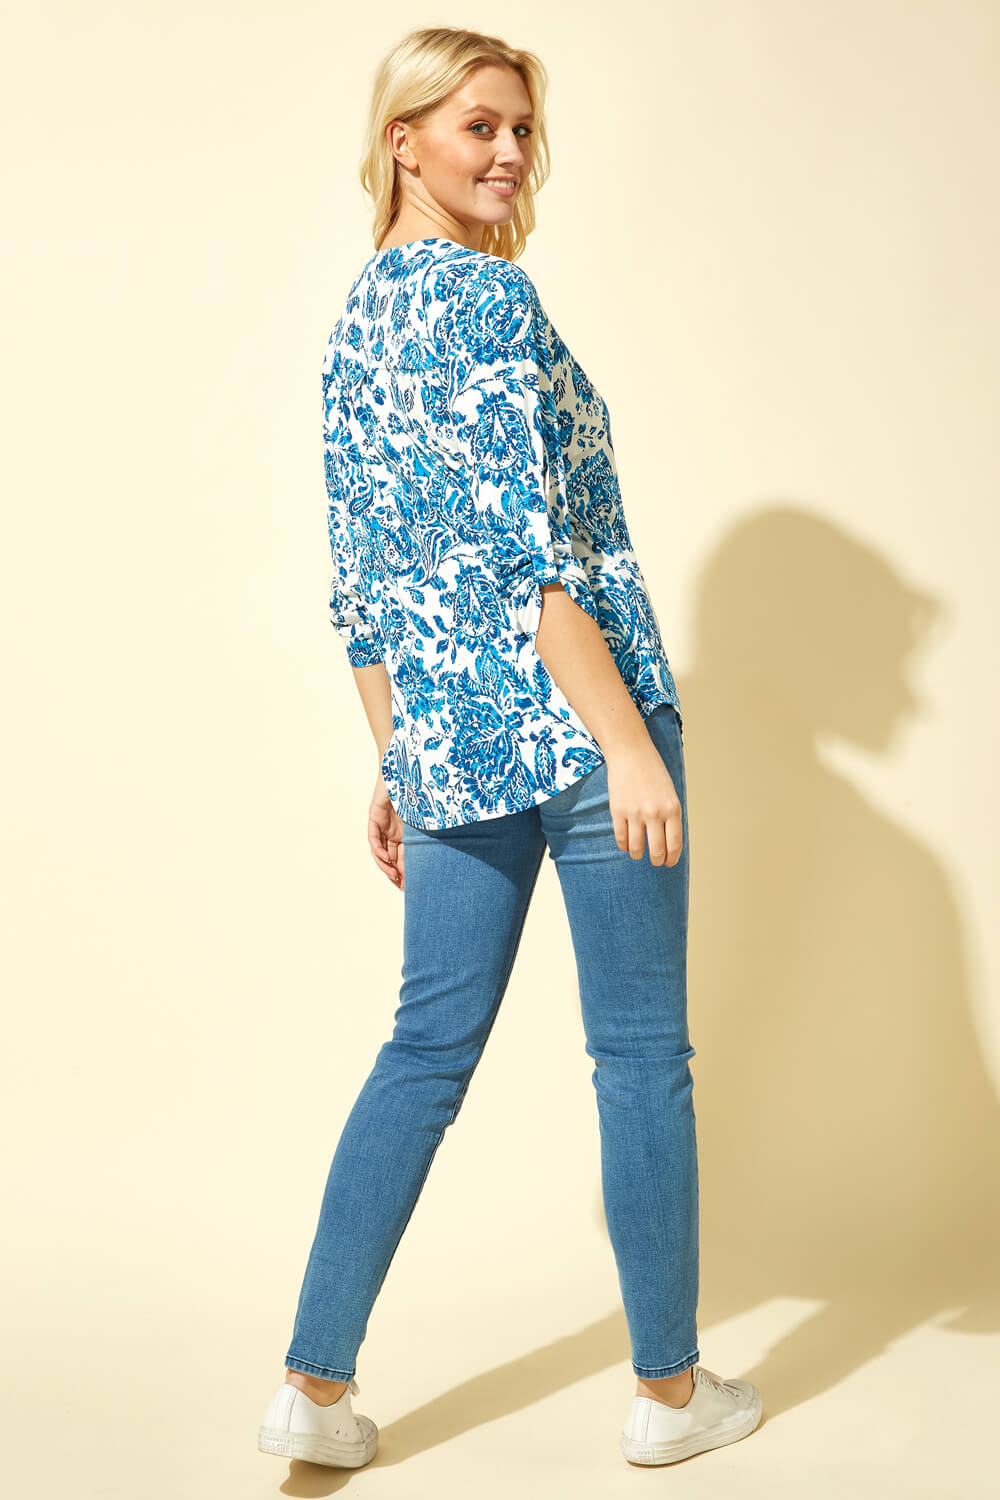 Blue Floral Paisley Notch Neck Top, Image 3 of 4